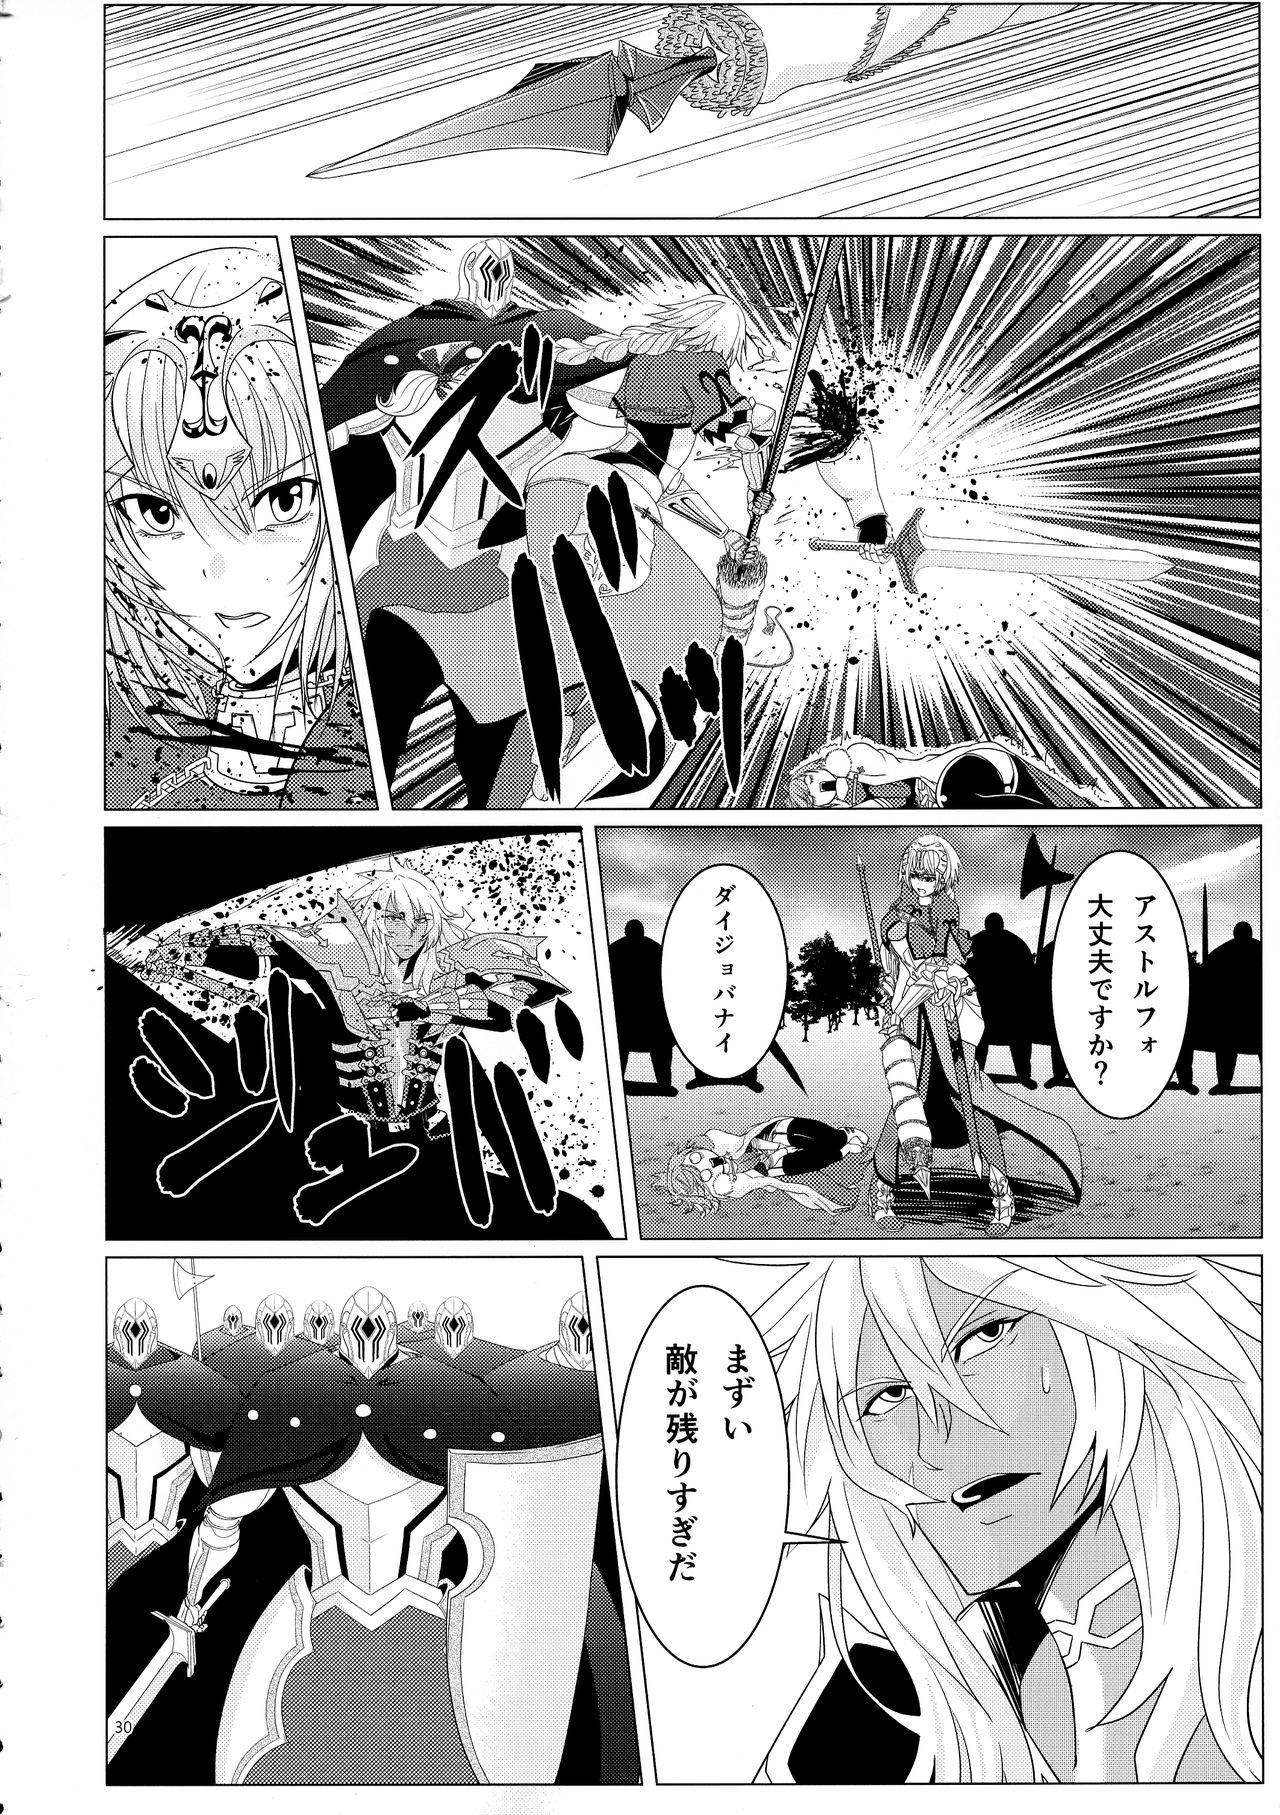 Matching Spirits - Jeanne and Astolfo have sex 26